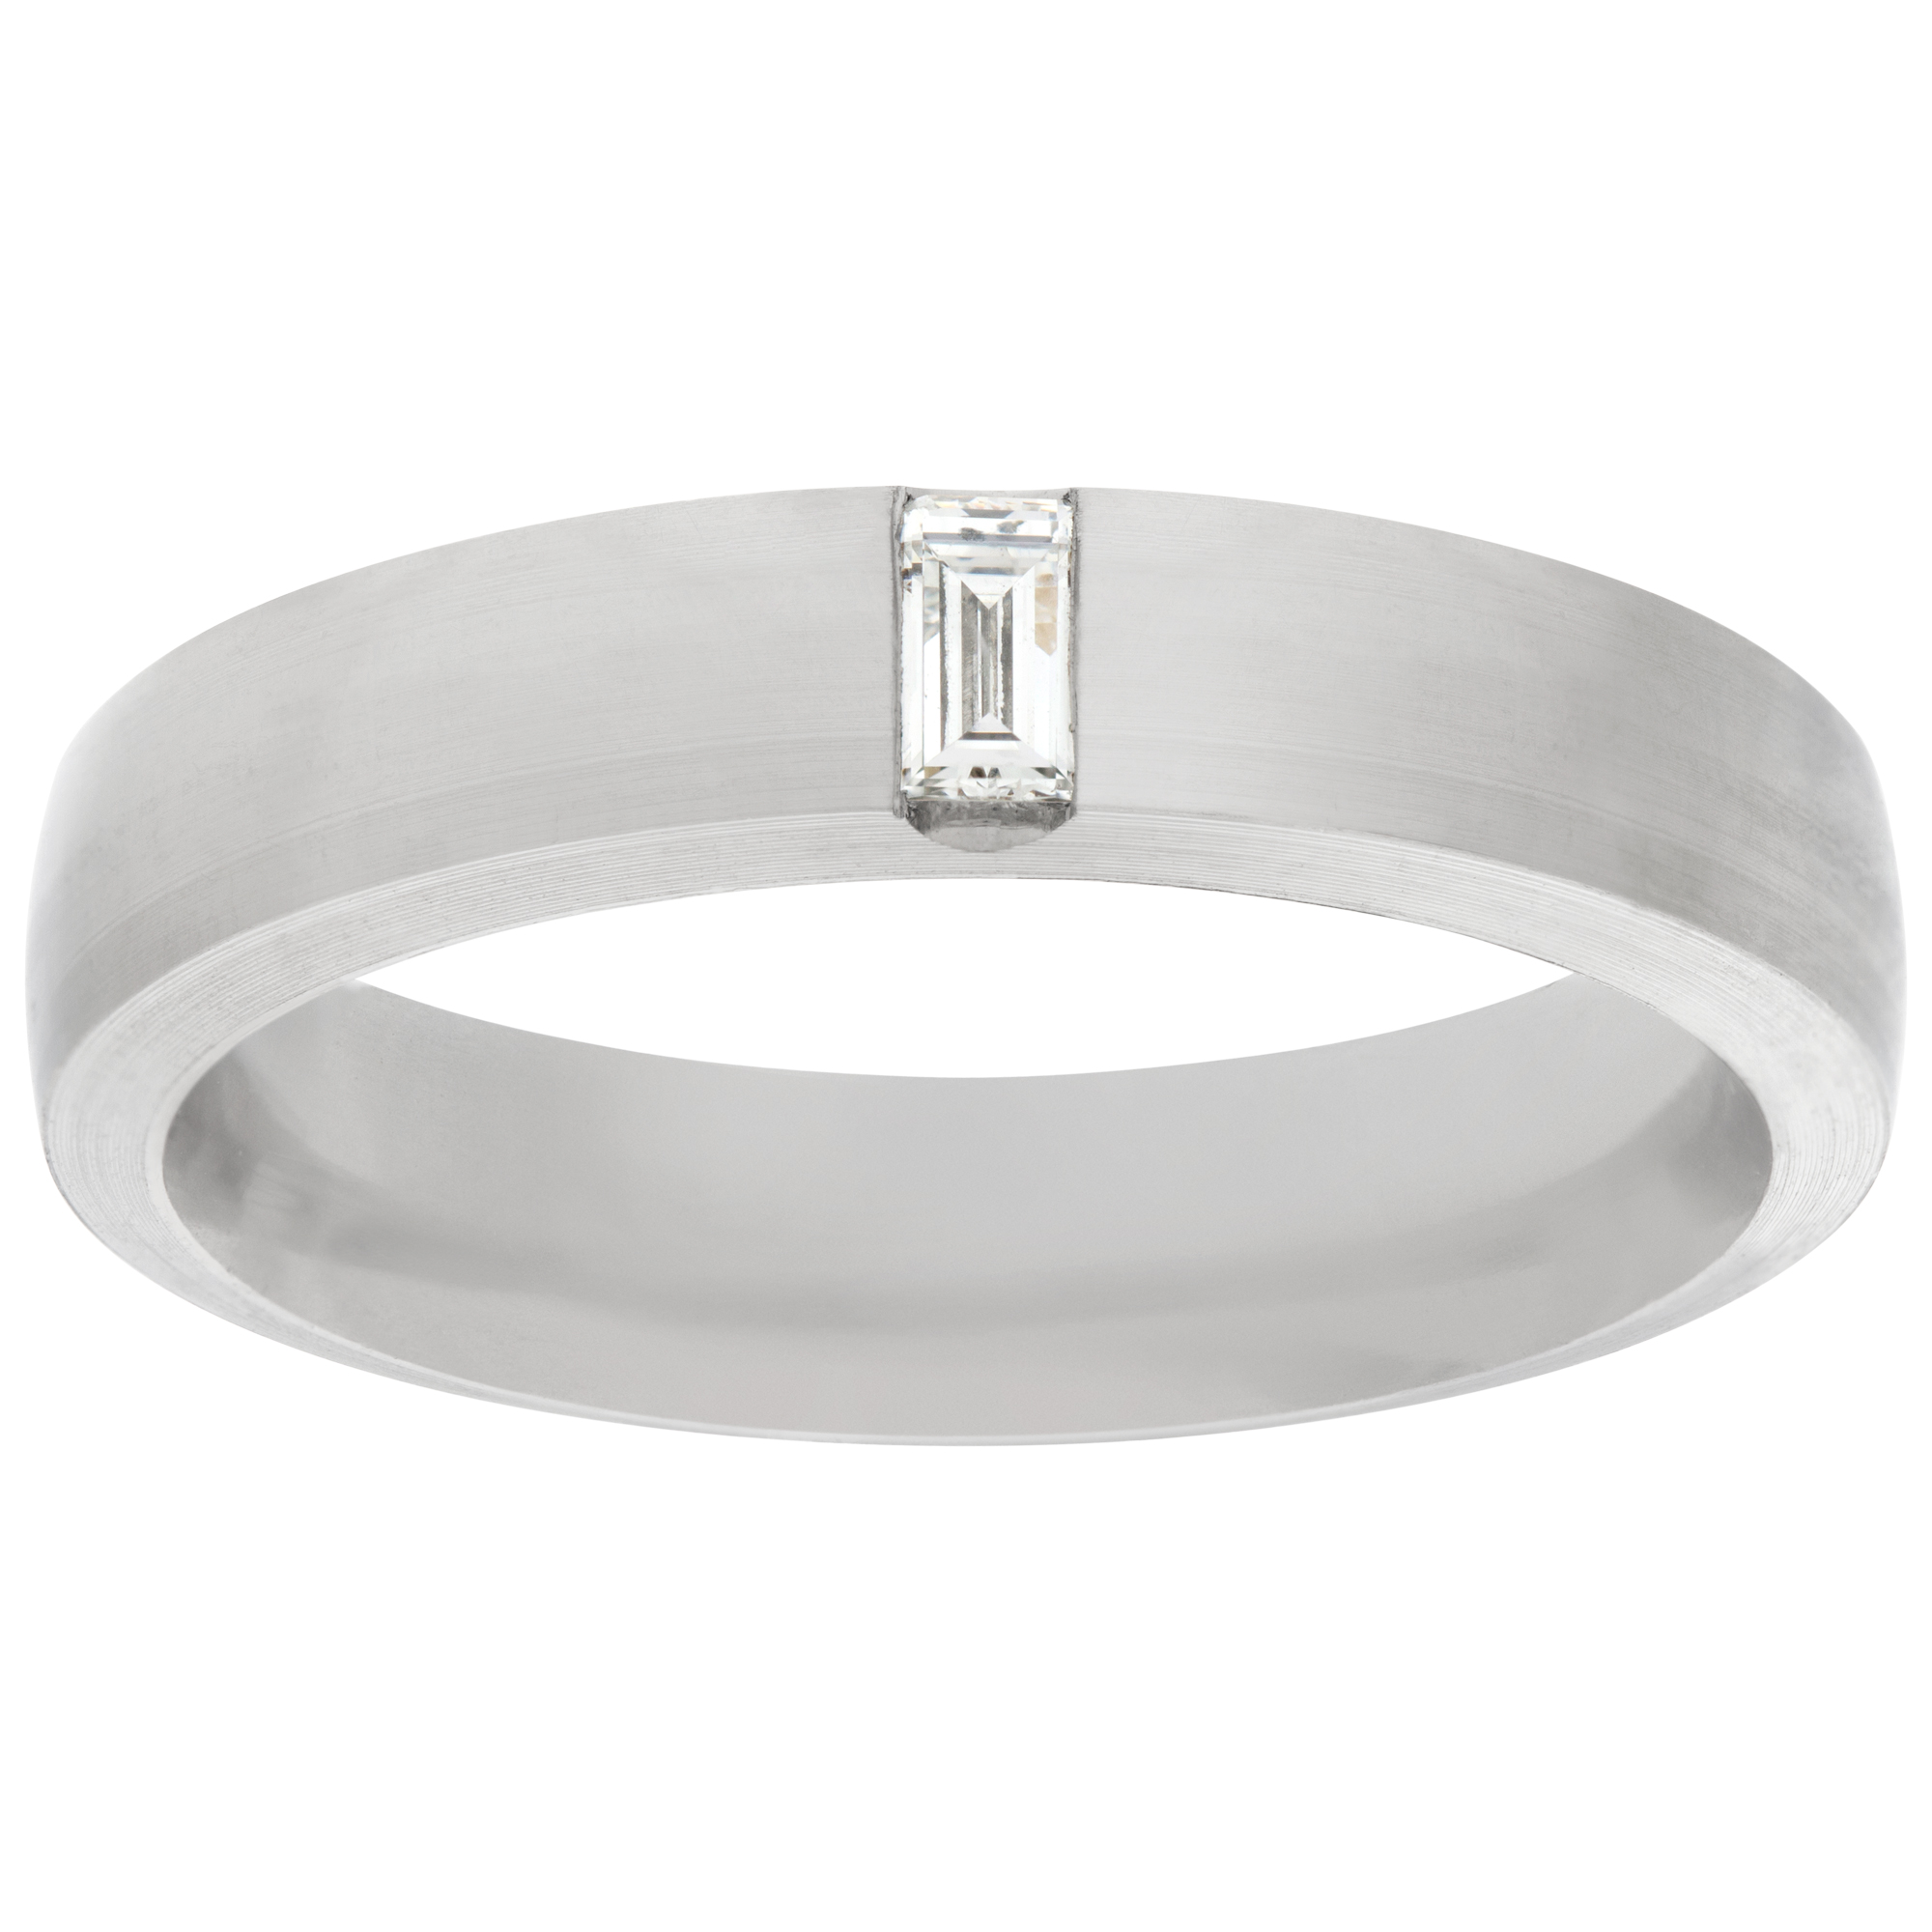 Tiffany & Co satin platinum ring with a single baguette diamond - 0.15 carat D-F Color, IF-VVS clarity. 5mm wide. Ring size 9.25 (Stones)